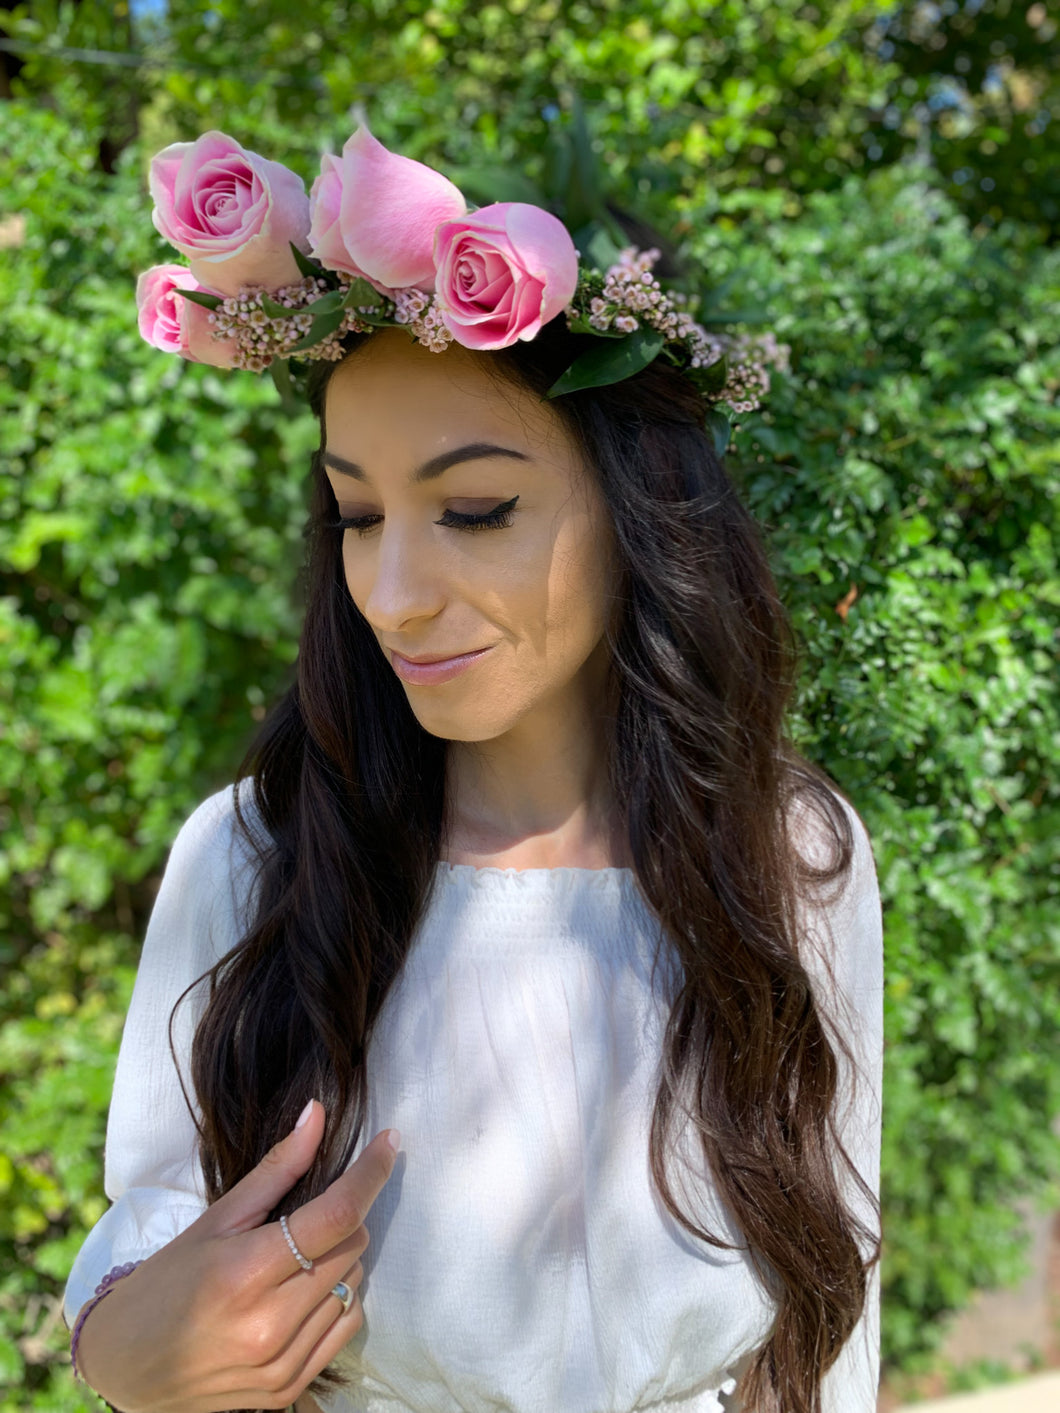 Woman wearing flower crown with pink roses outdoors